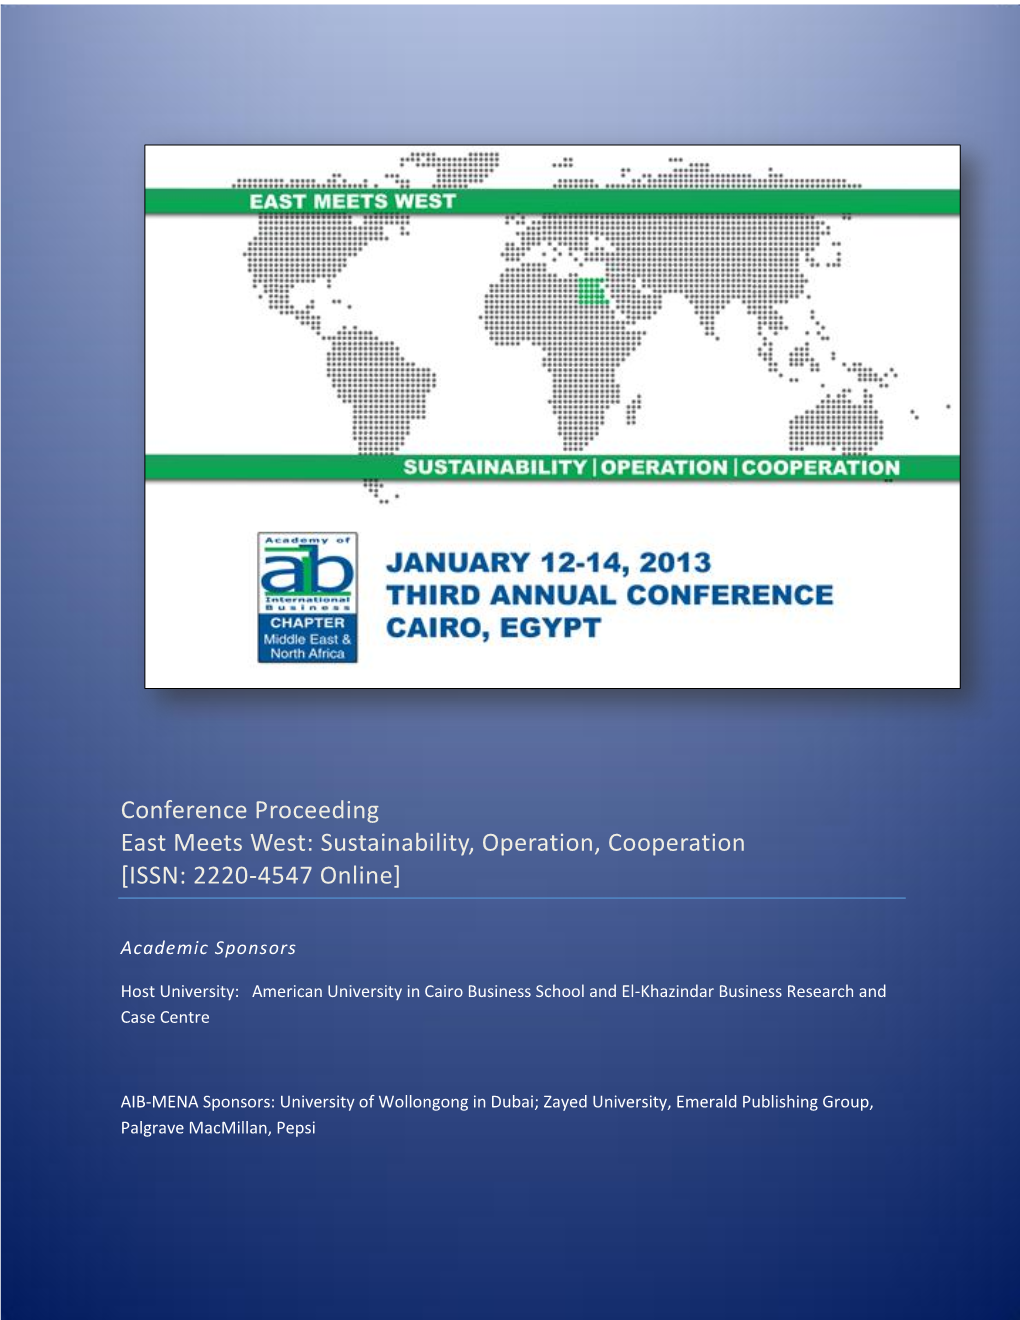 Conference Proceeding 2013: East Meets West